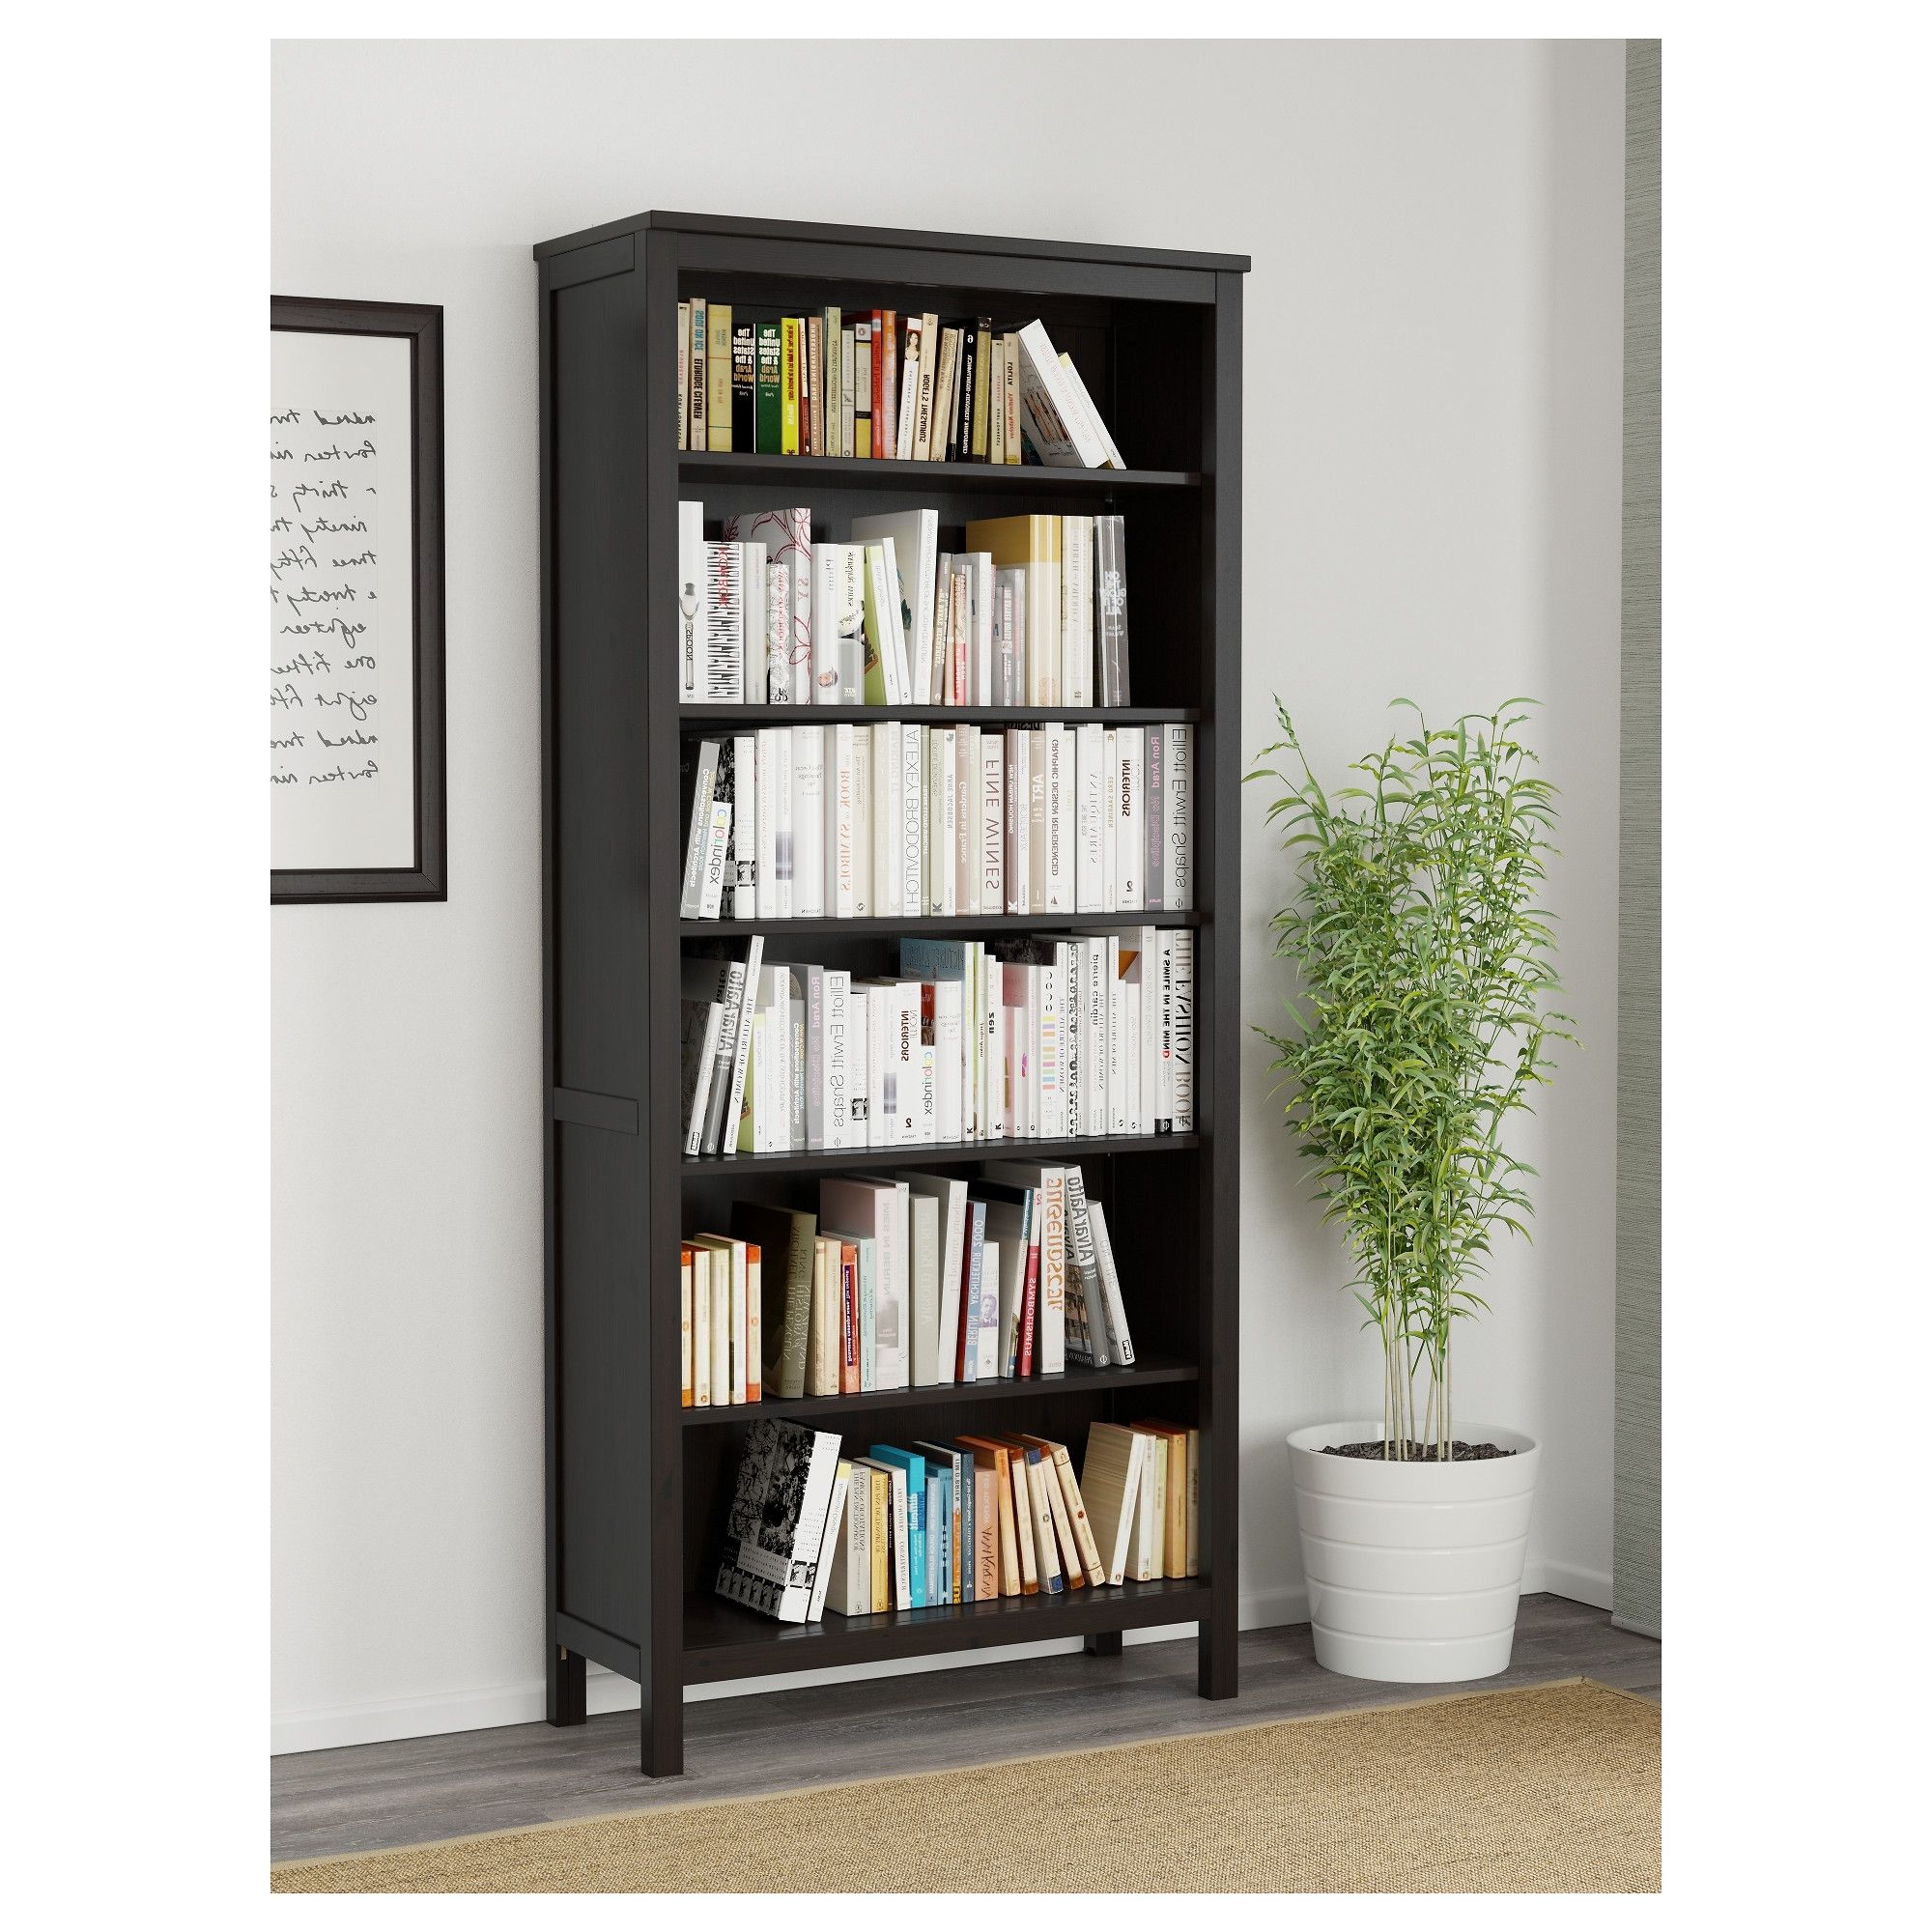 Fashionable Ikea Hemnes Bookcases Within Hemnes Bookcase – Black Brown – Ikea (View 1 of 15)